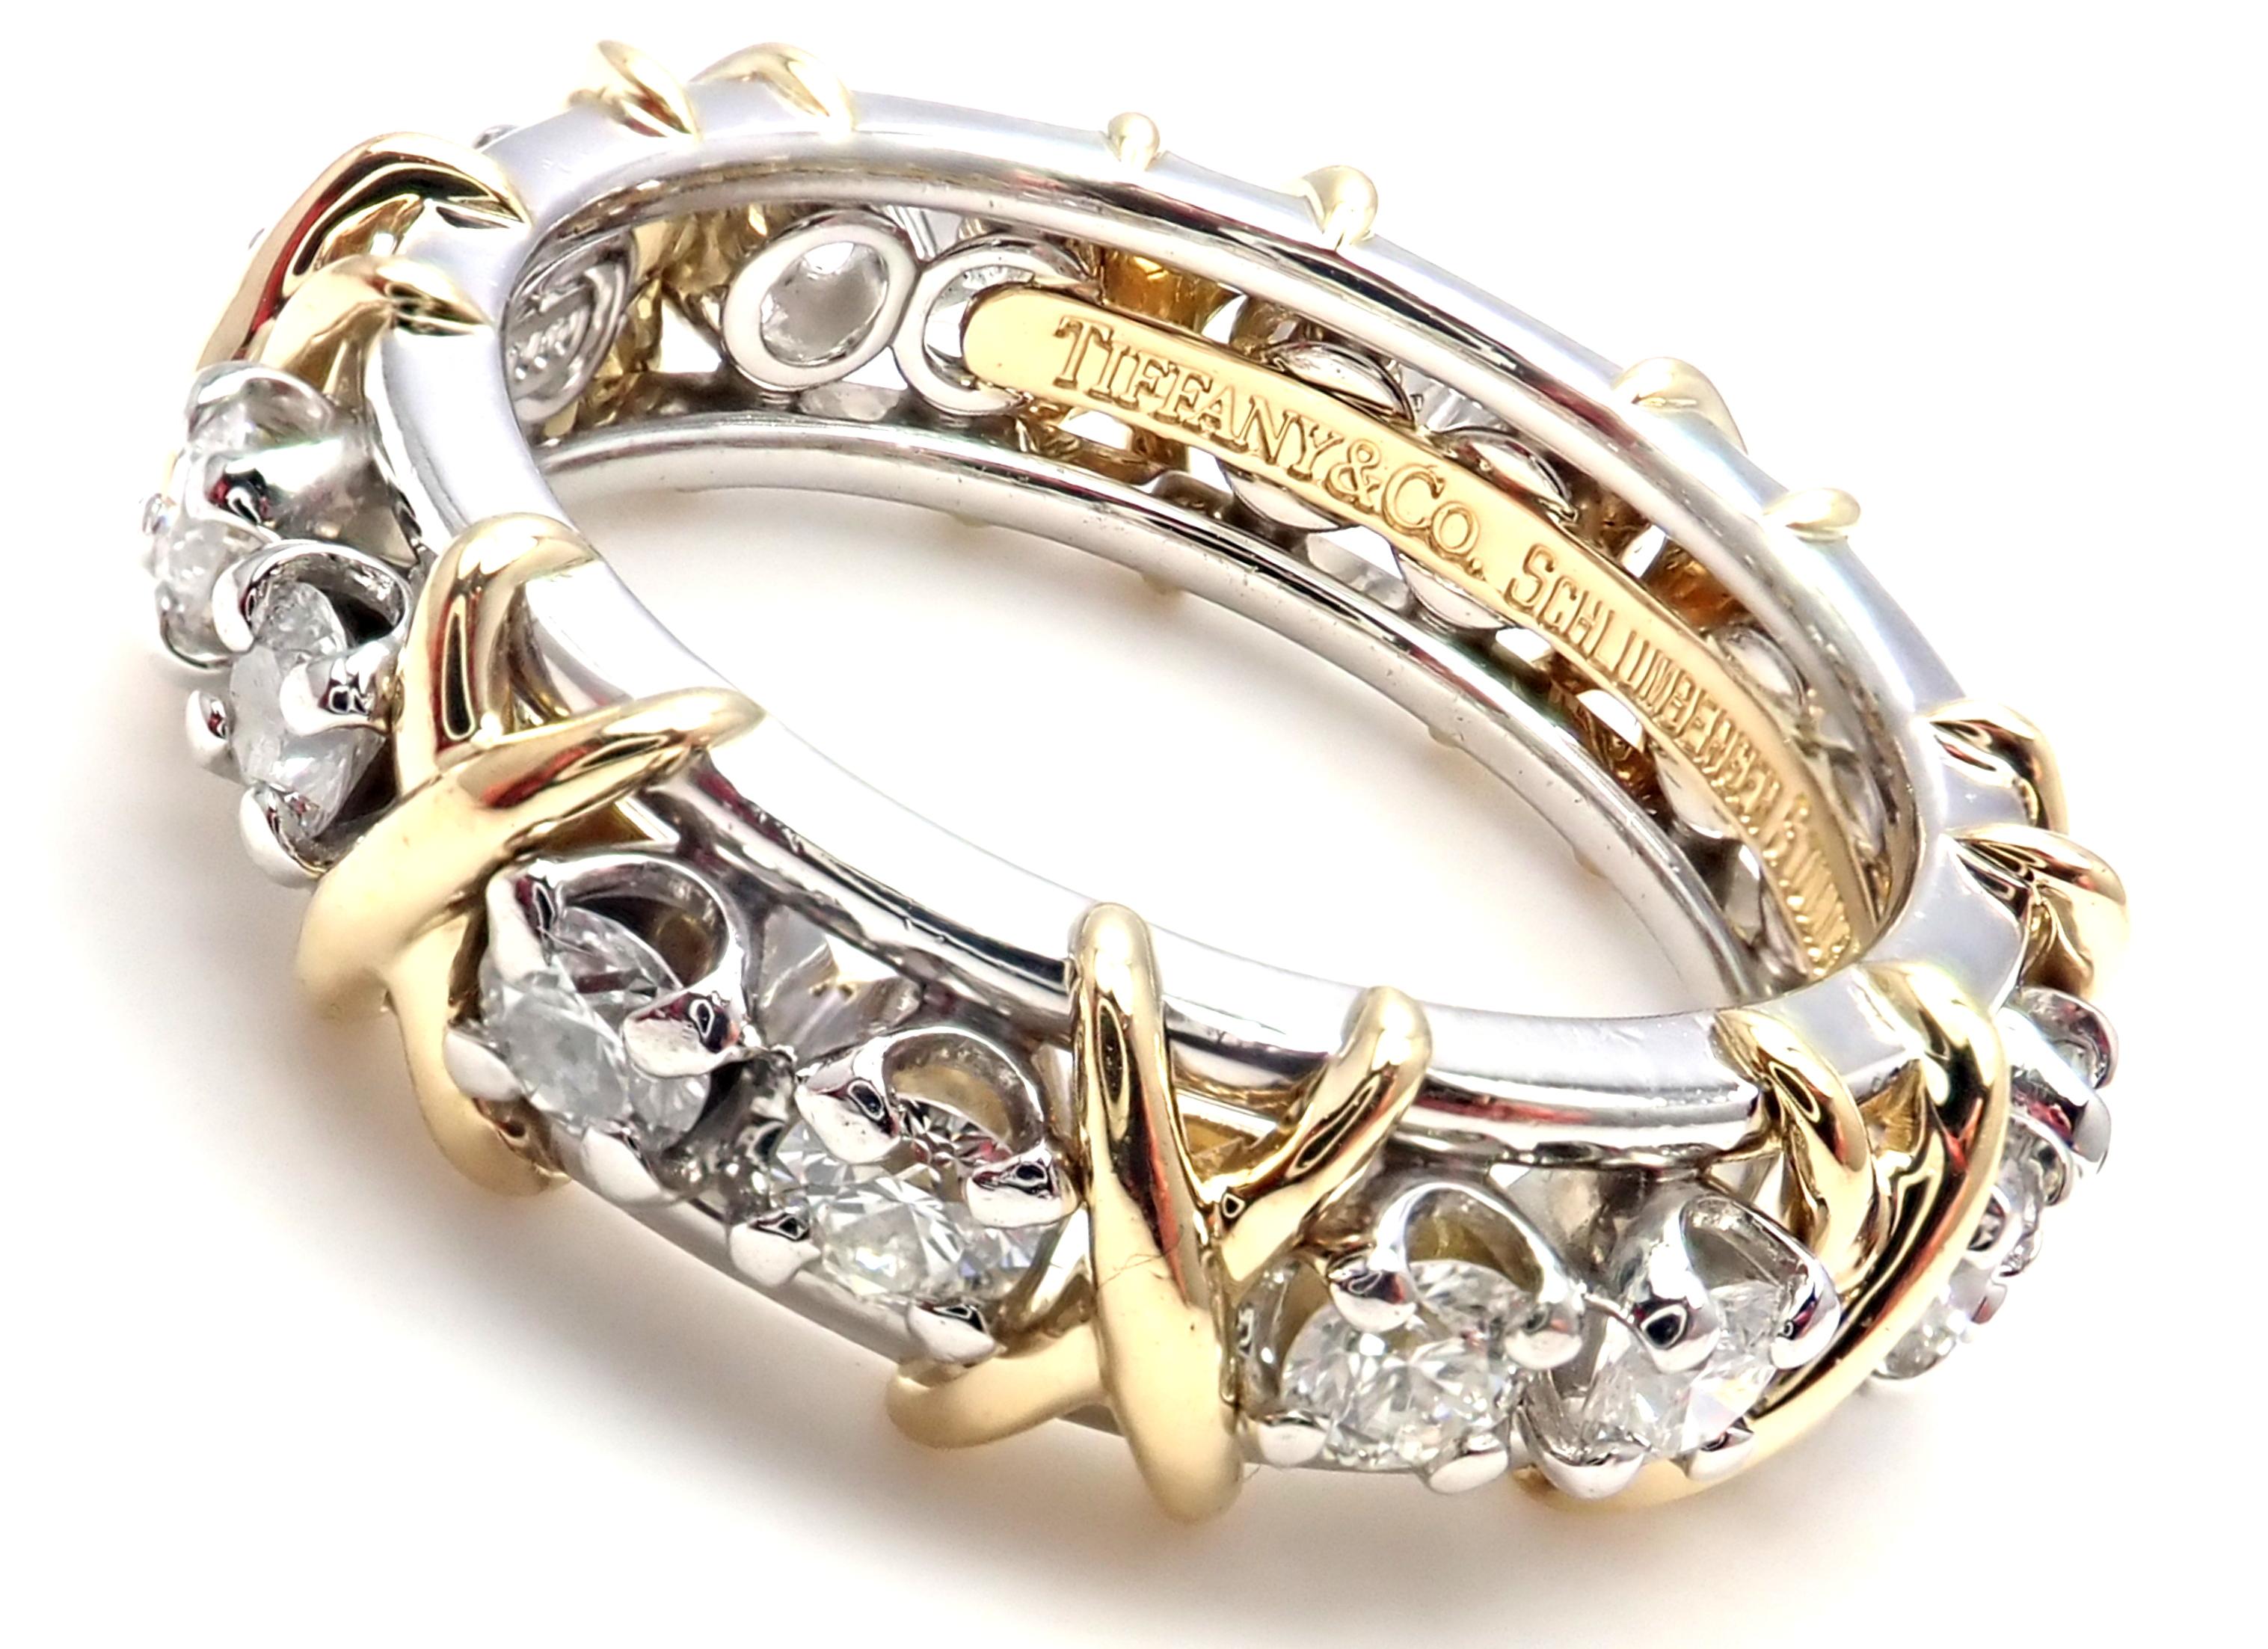 Tiffany & Co. Jean Schlumberger Yellow Gold and Platinum Diamond Ring 1